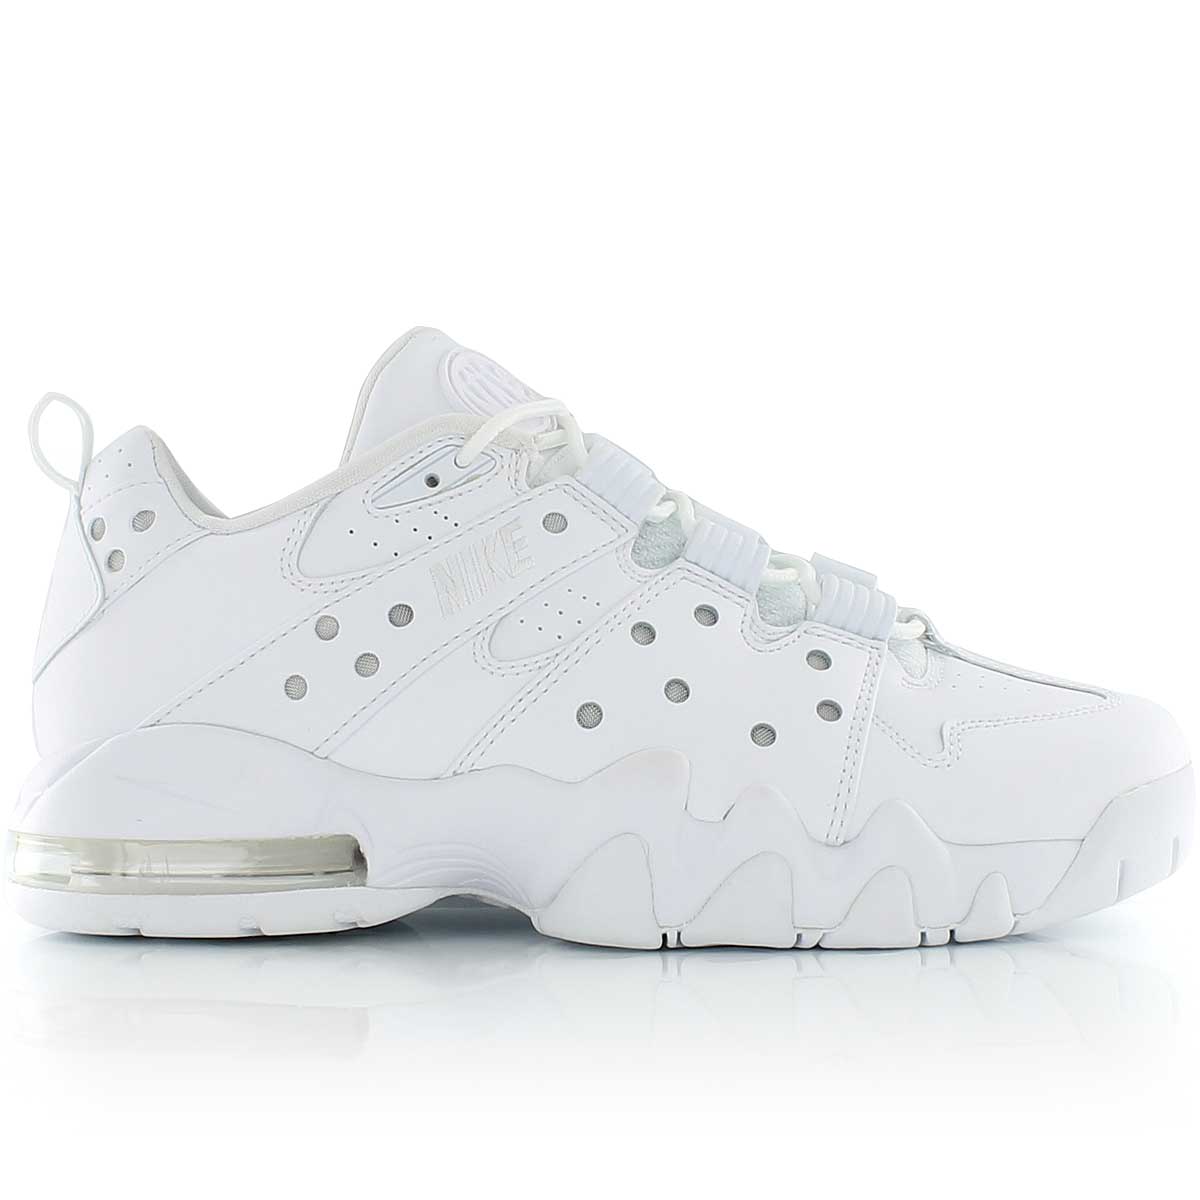 Buy AIR MAX2 CB '94 LOW for N/A 0.0 on 